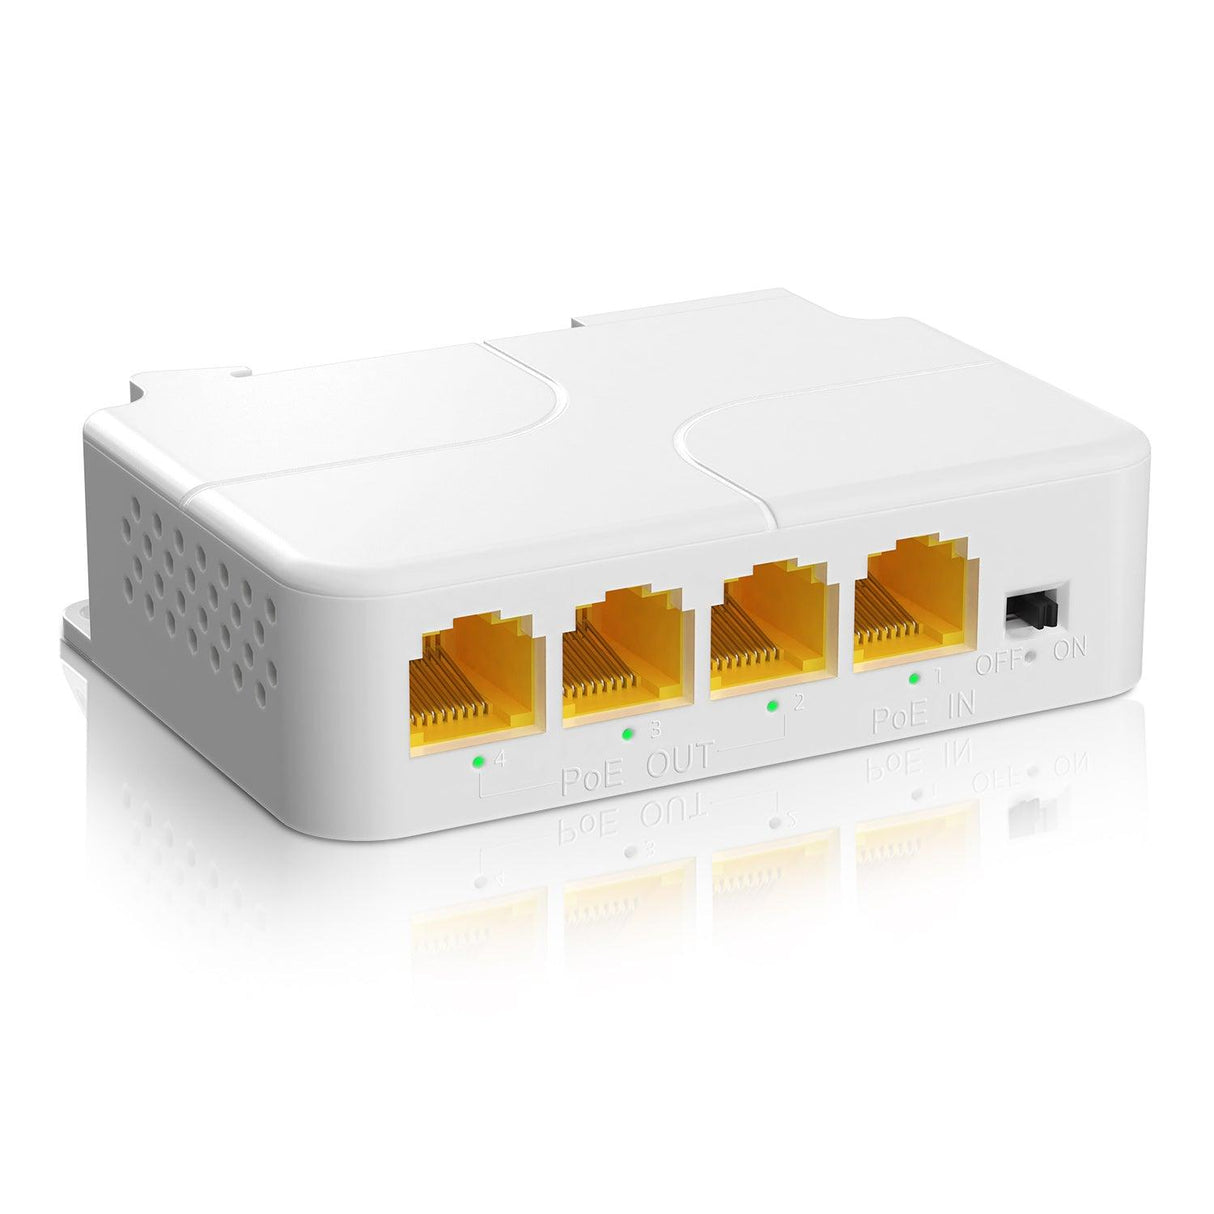 1 in 3 Out Gigabit PoE Extender, NICGIGA 3 Port PoE Repeater 100 Meters(328 ft),IEEE 802.3af/at Power Over Ethernet PoE Splitter to 3 PoE Devices Like IP Cameras, IP Phone, Wireless AP